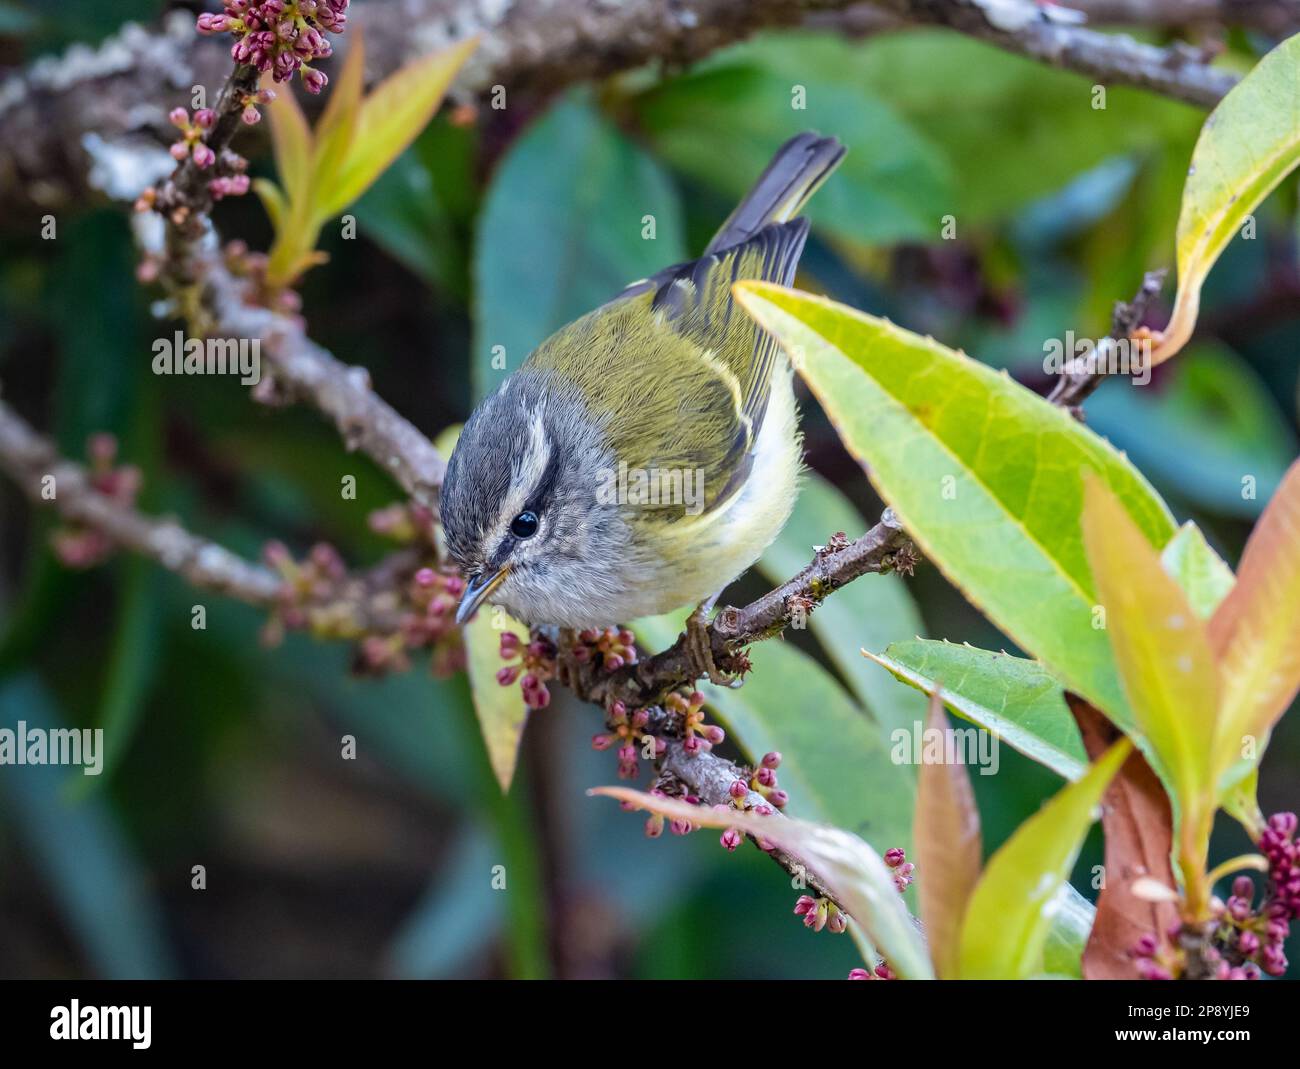 An Ashy-throated Warbler (Phylloscopus maculipennis) foraging on tree. Thailand. Stock Photo